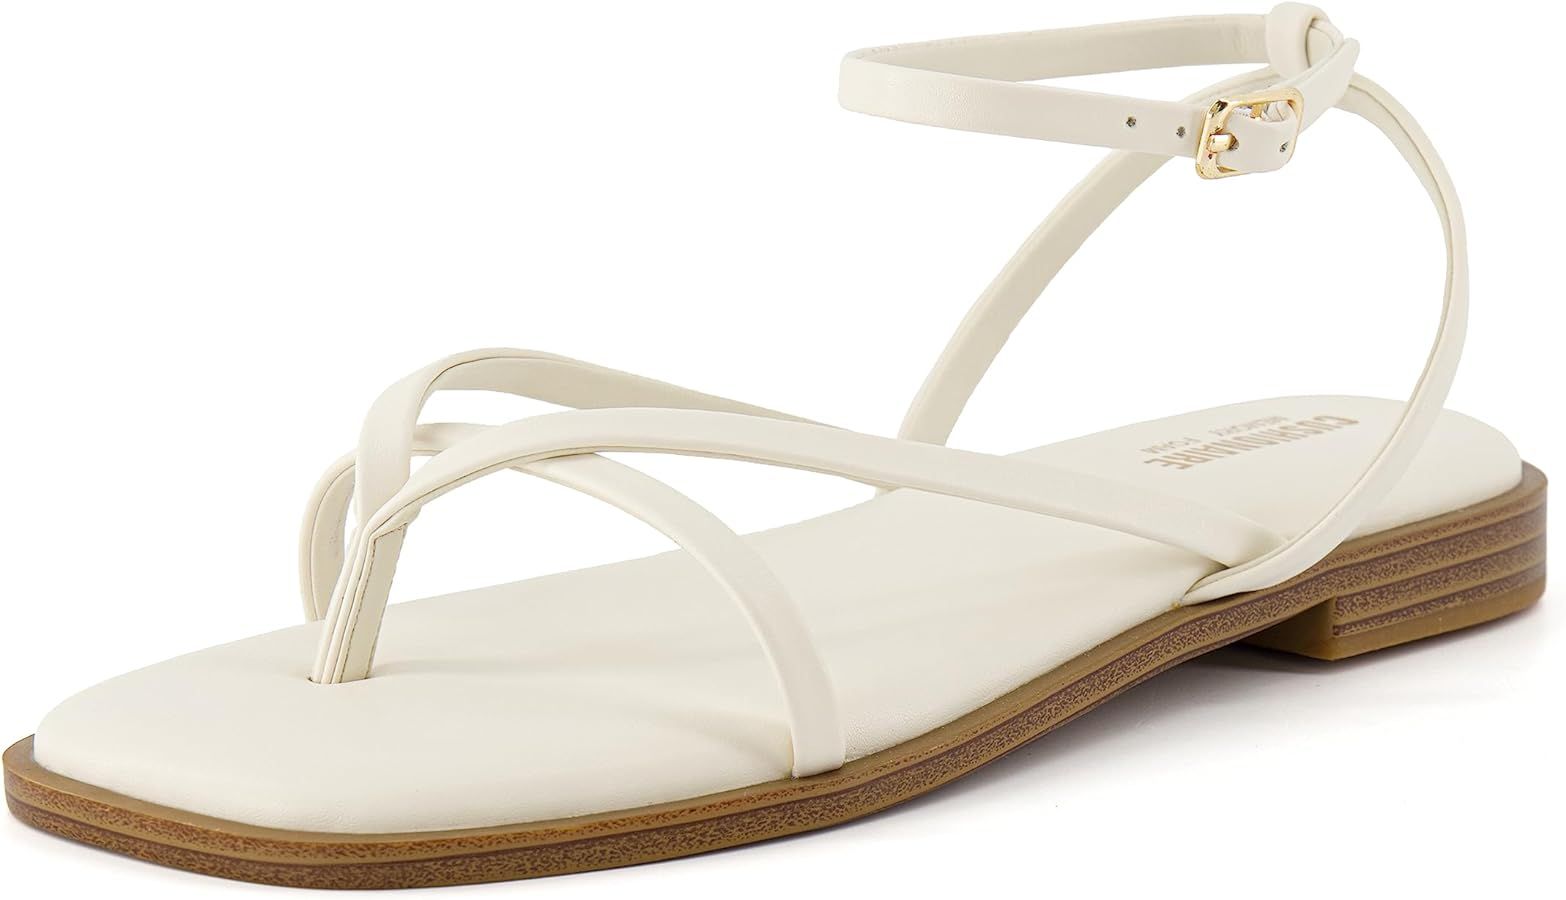 CUSHIONAIRE Women's Vida strappy flat sandal +Memory Foam and Wide Widths Available | Amazon (US)